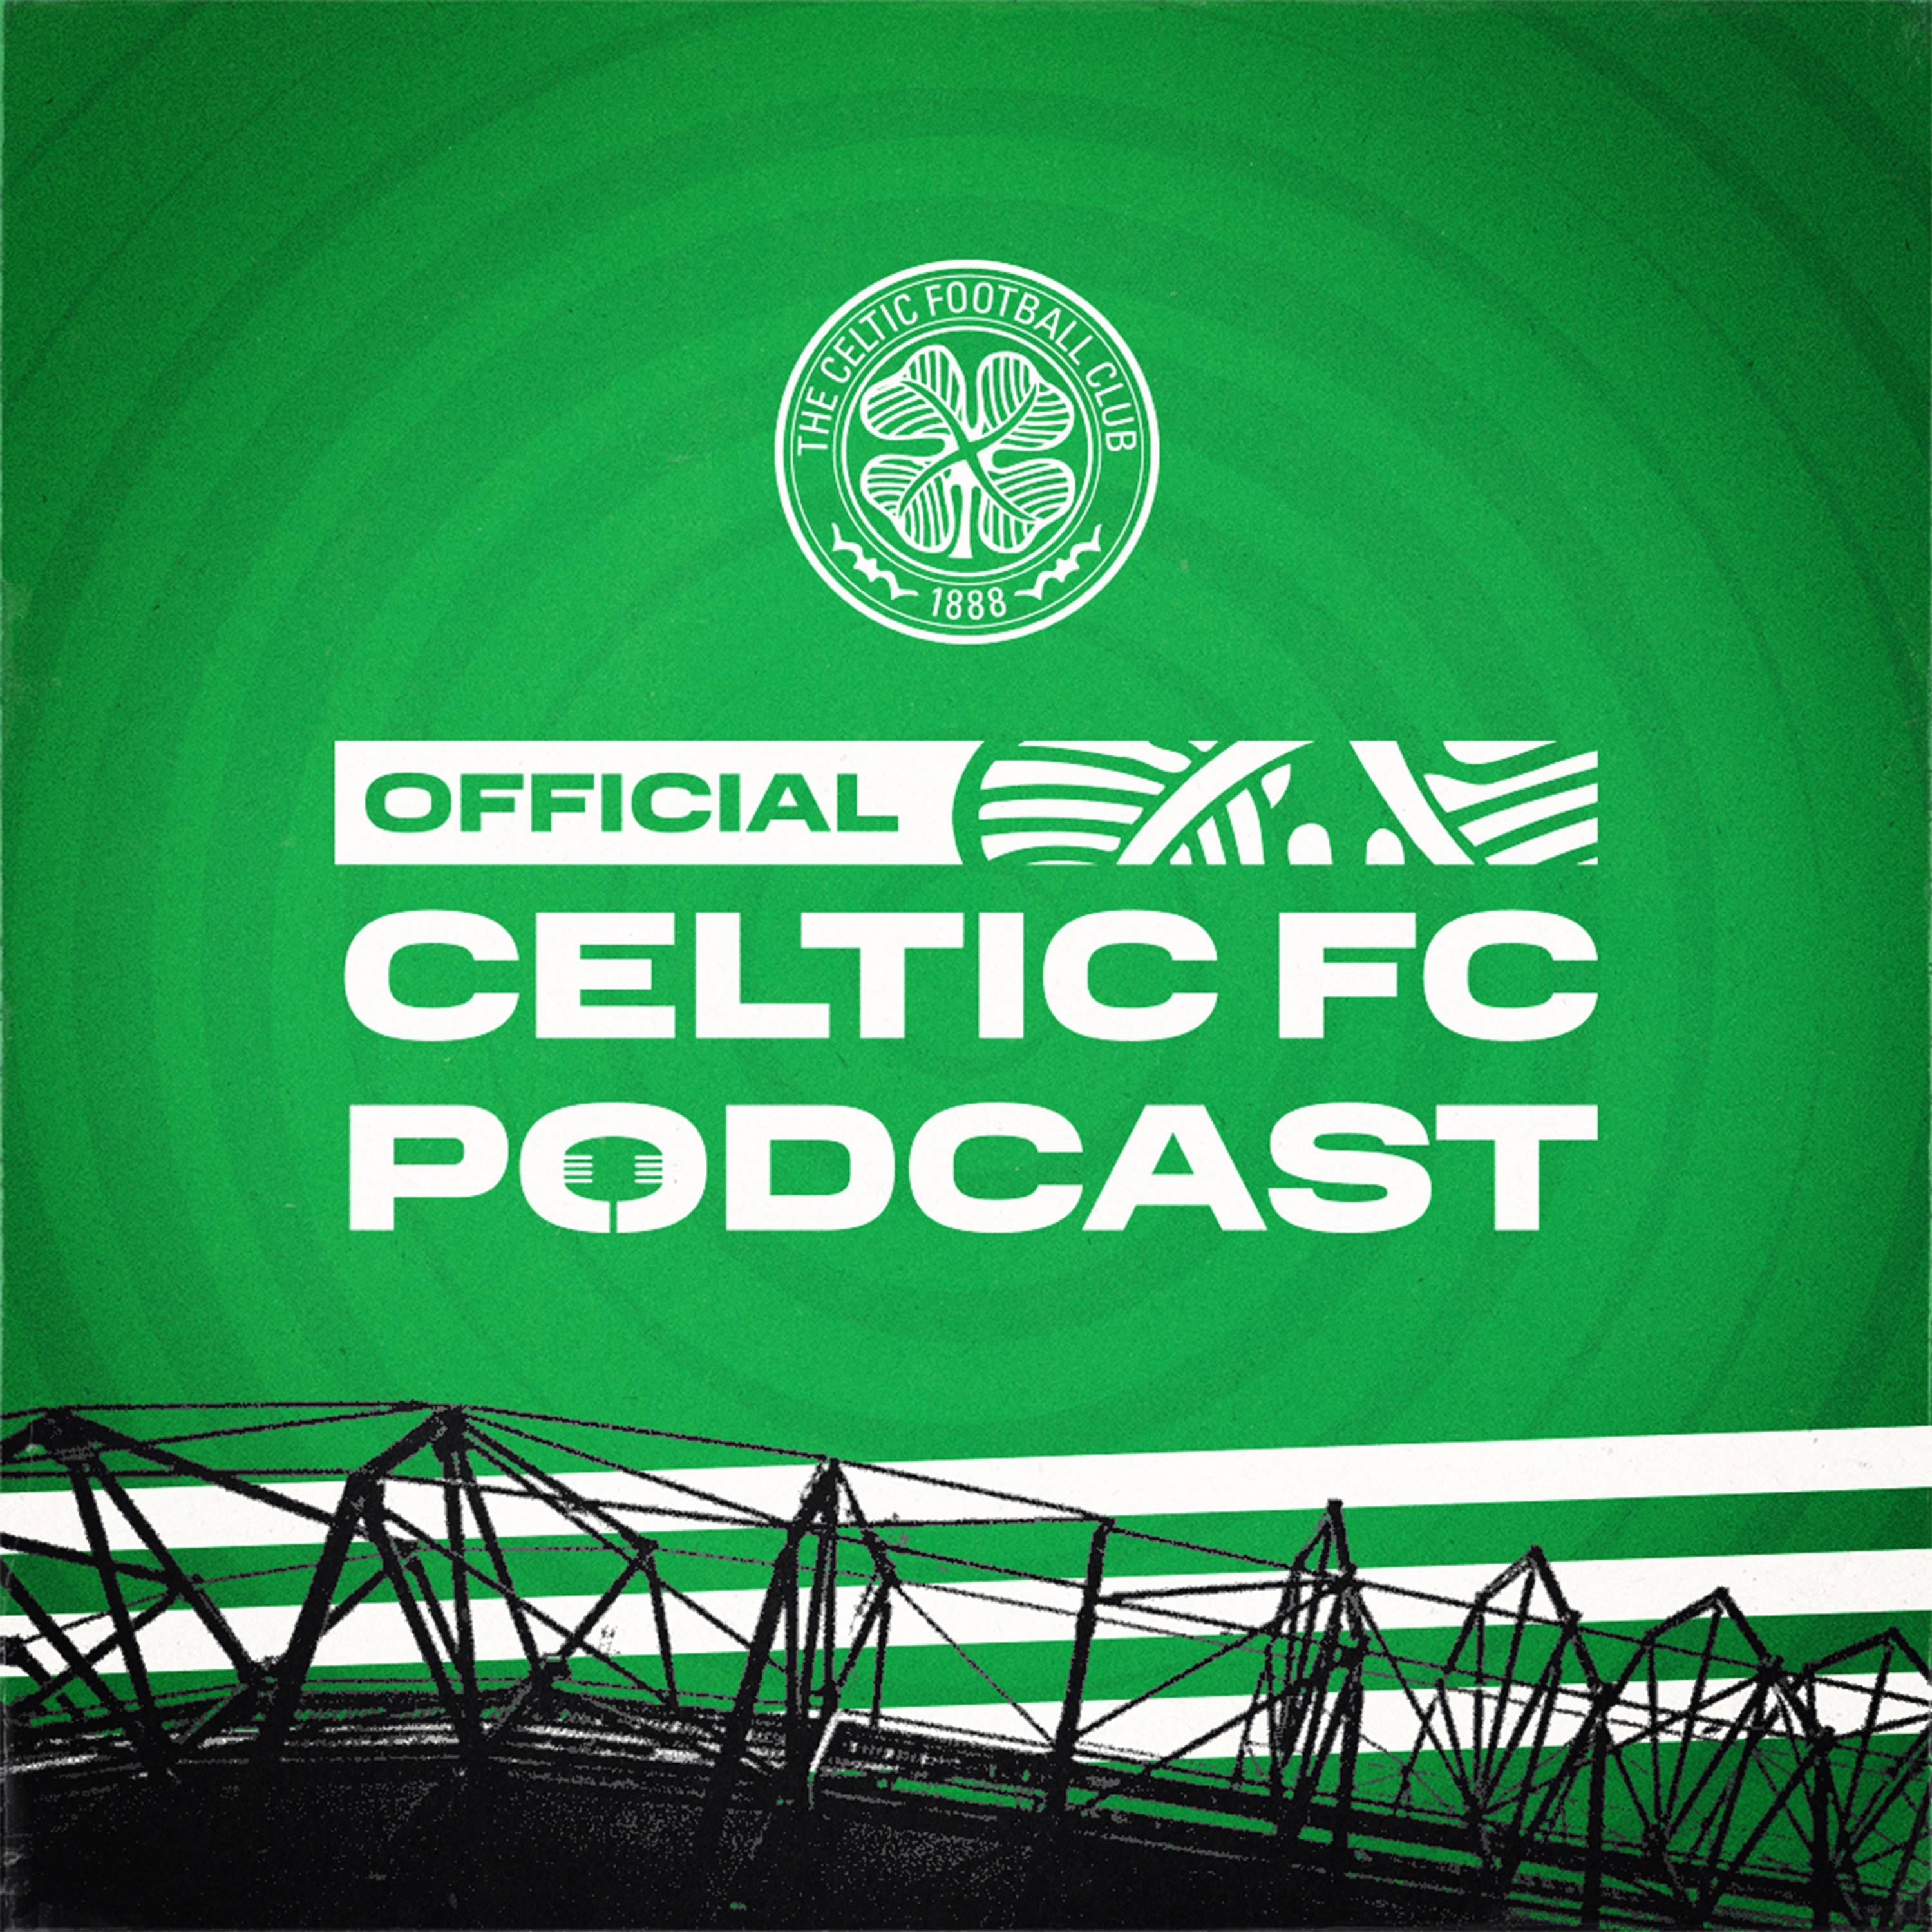 Special guest Celtic FC legend Roy Aitken builds up to UEFA Champions League Atletico Madrid match and shares unmissable stories from his playing career including that 1989 free-kick!